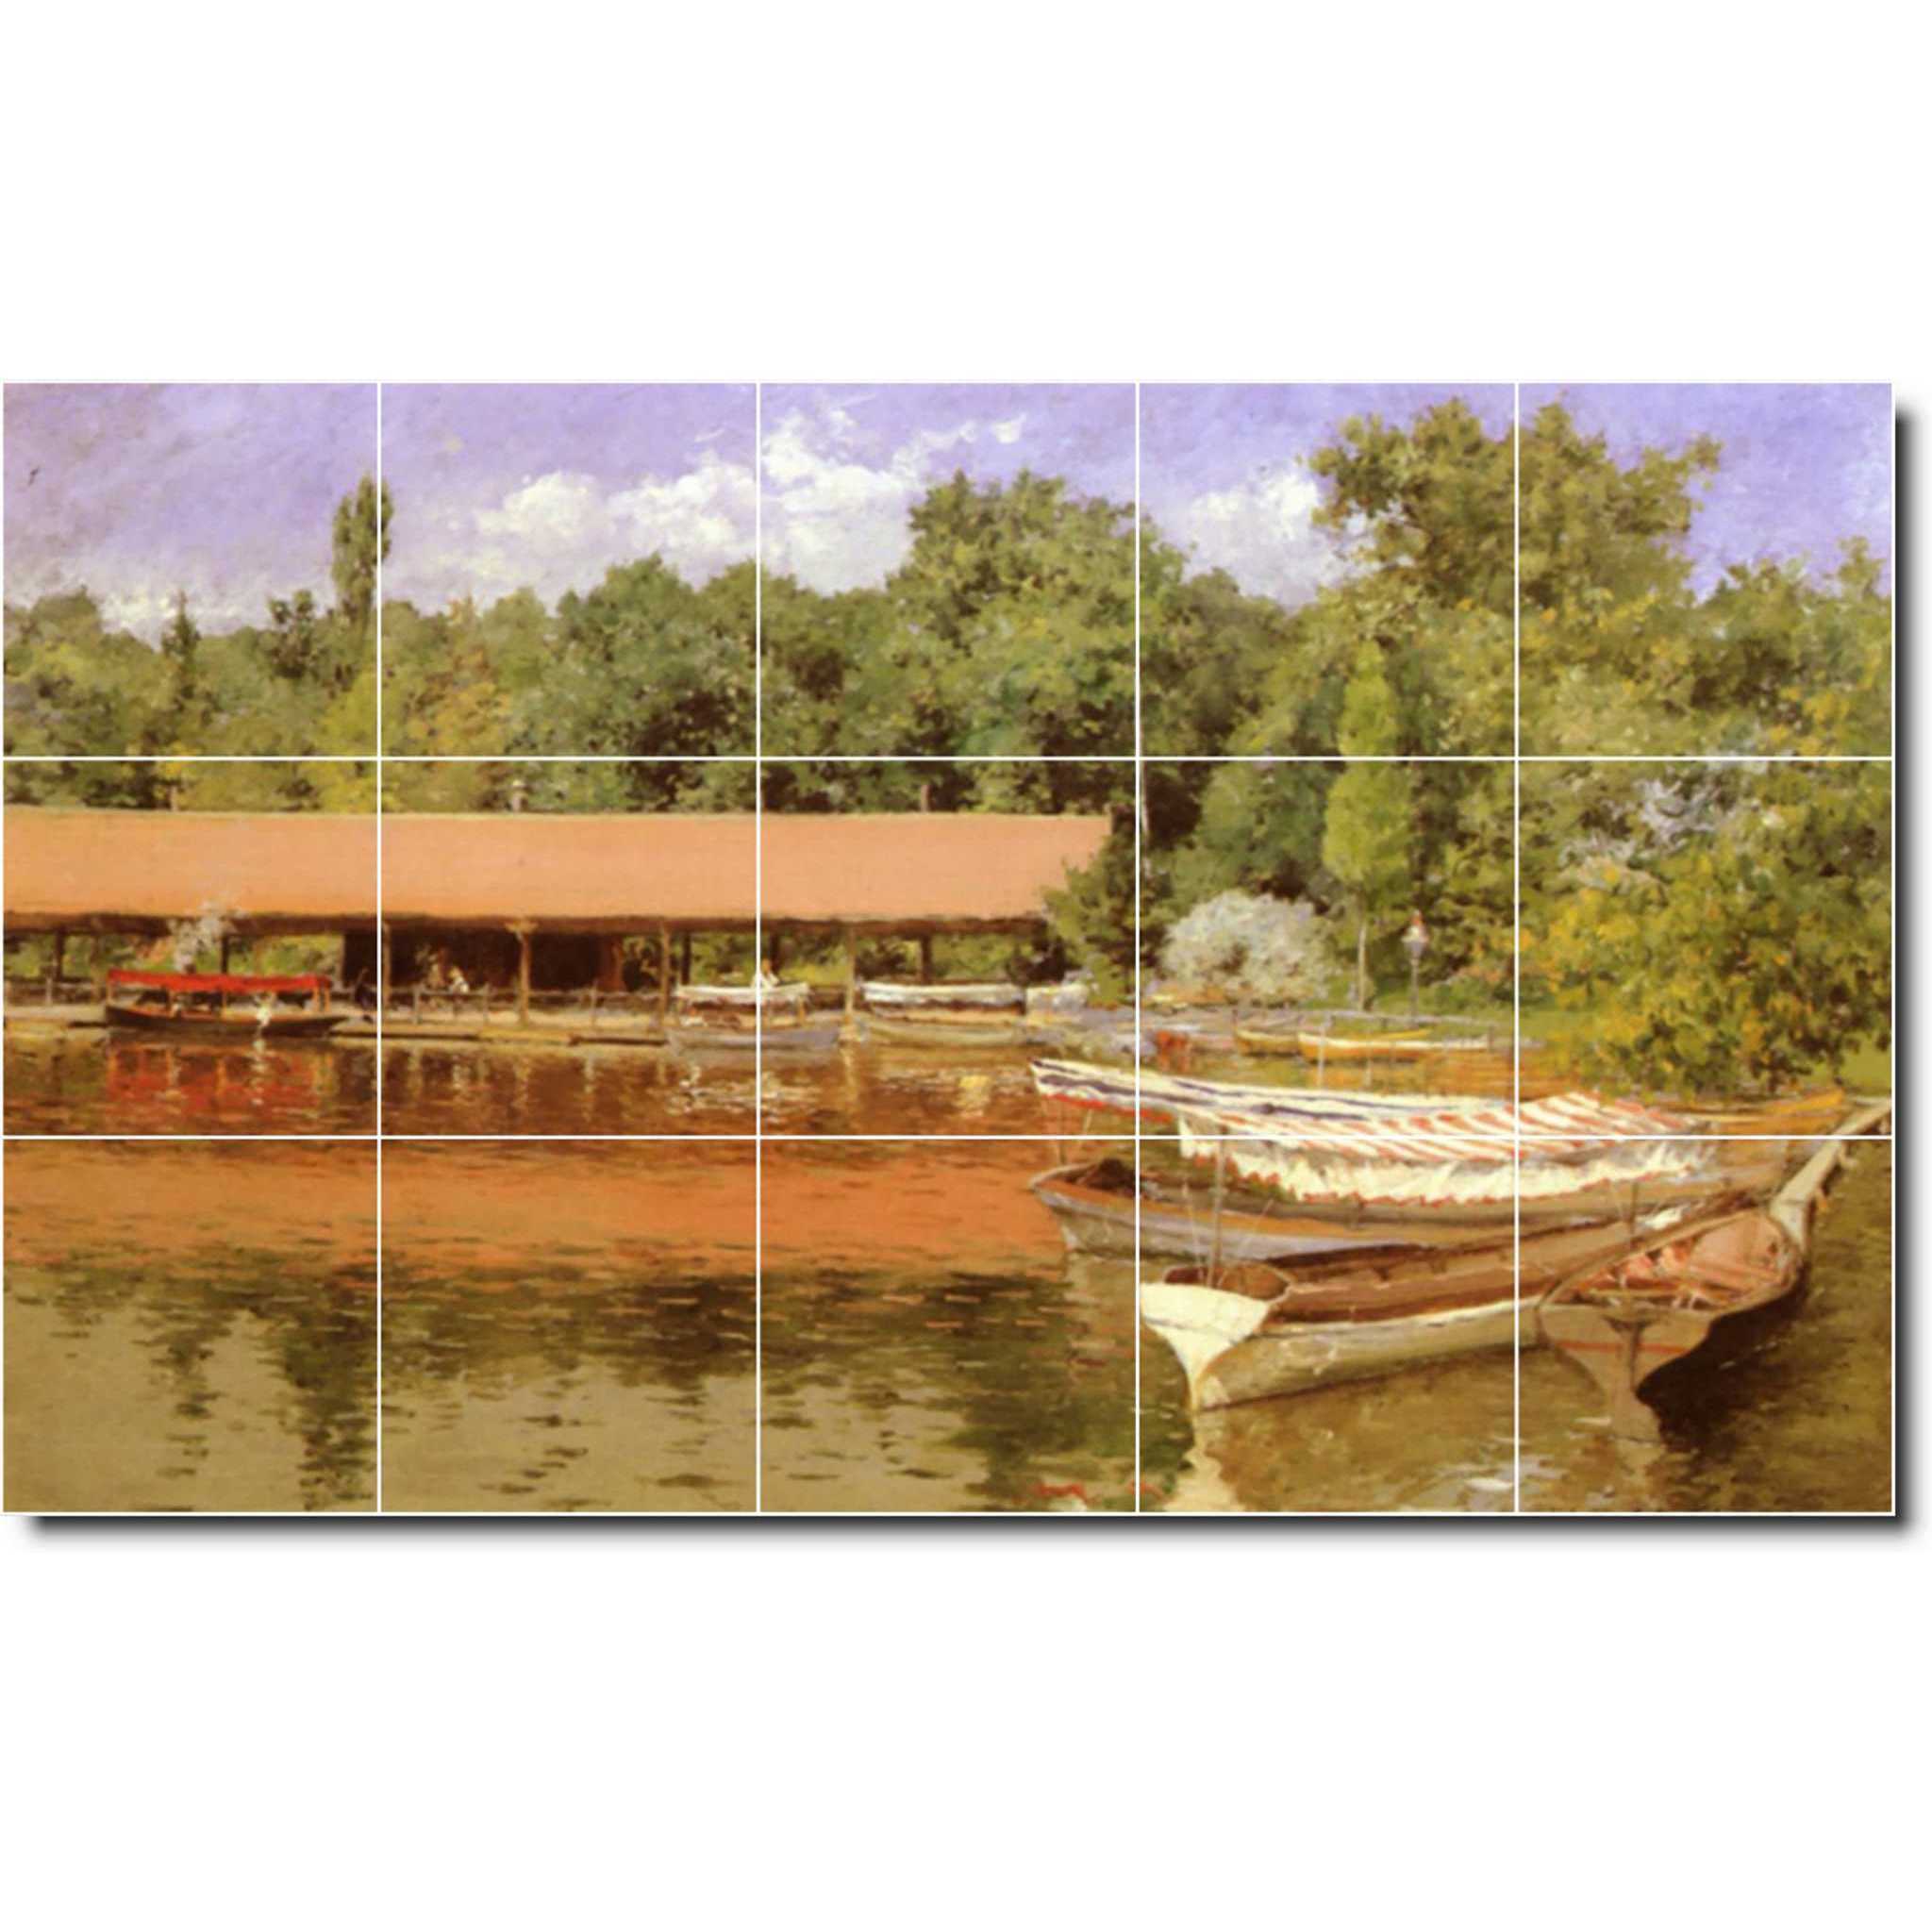 william chase waterfront painting ceramic tile mural p01496